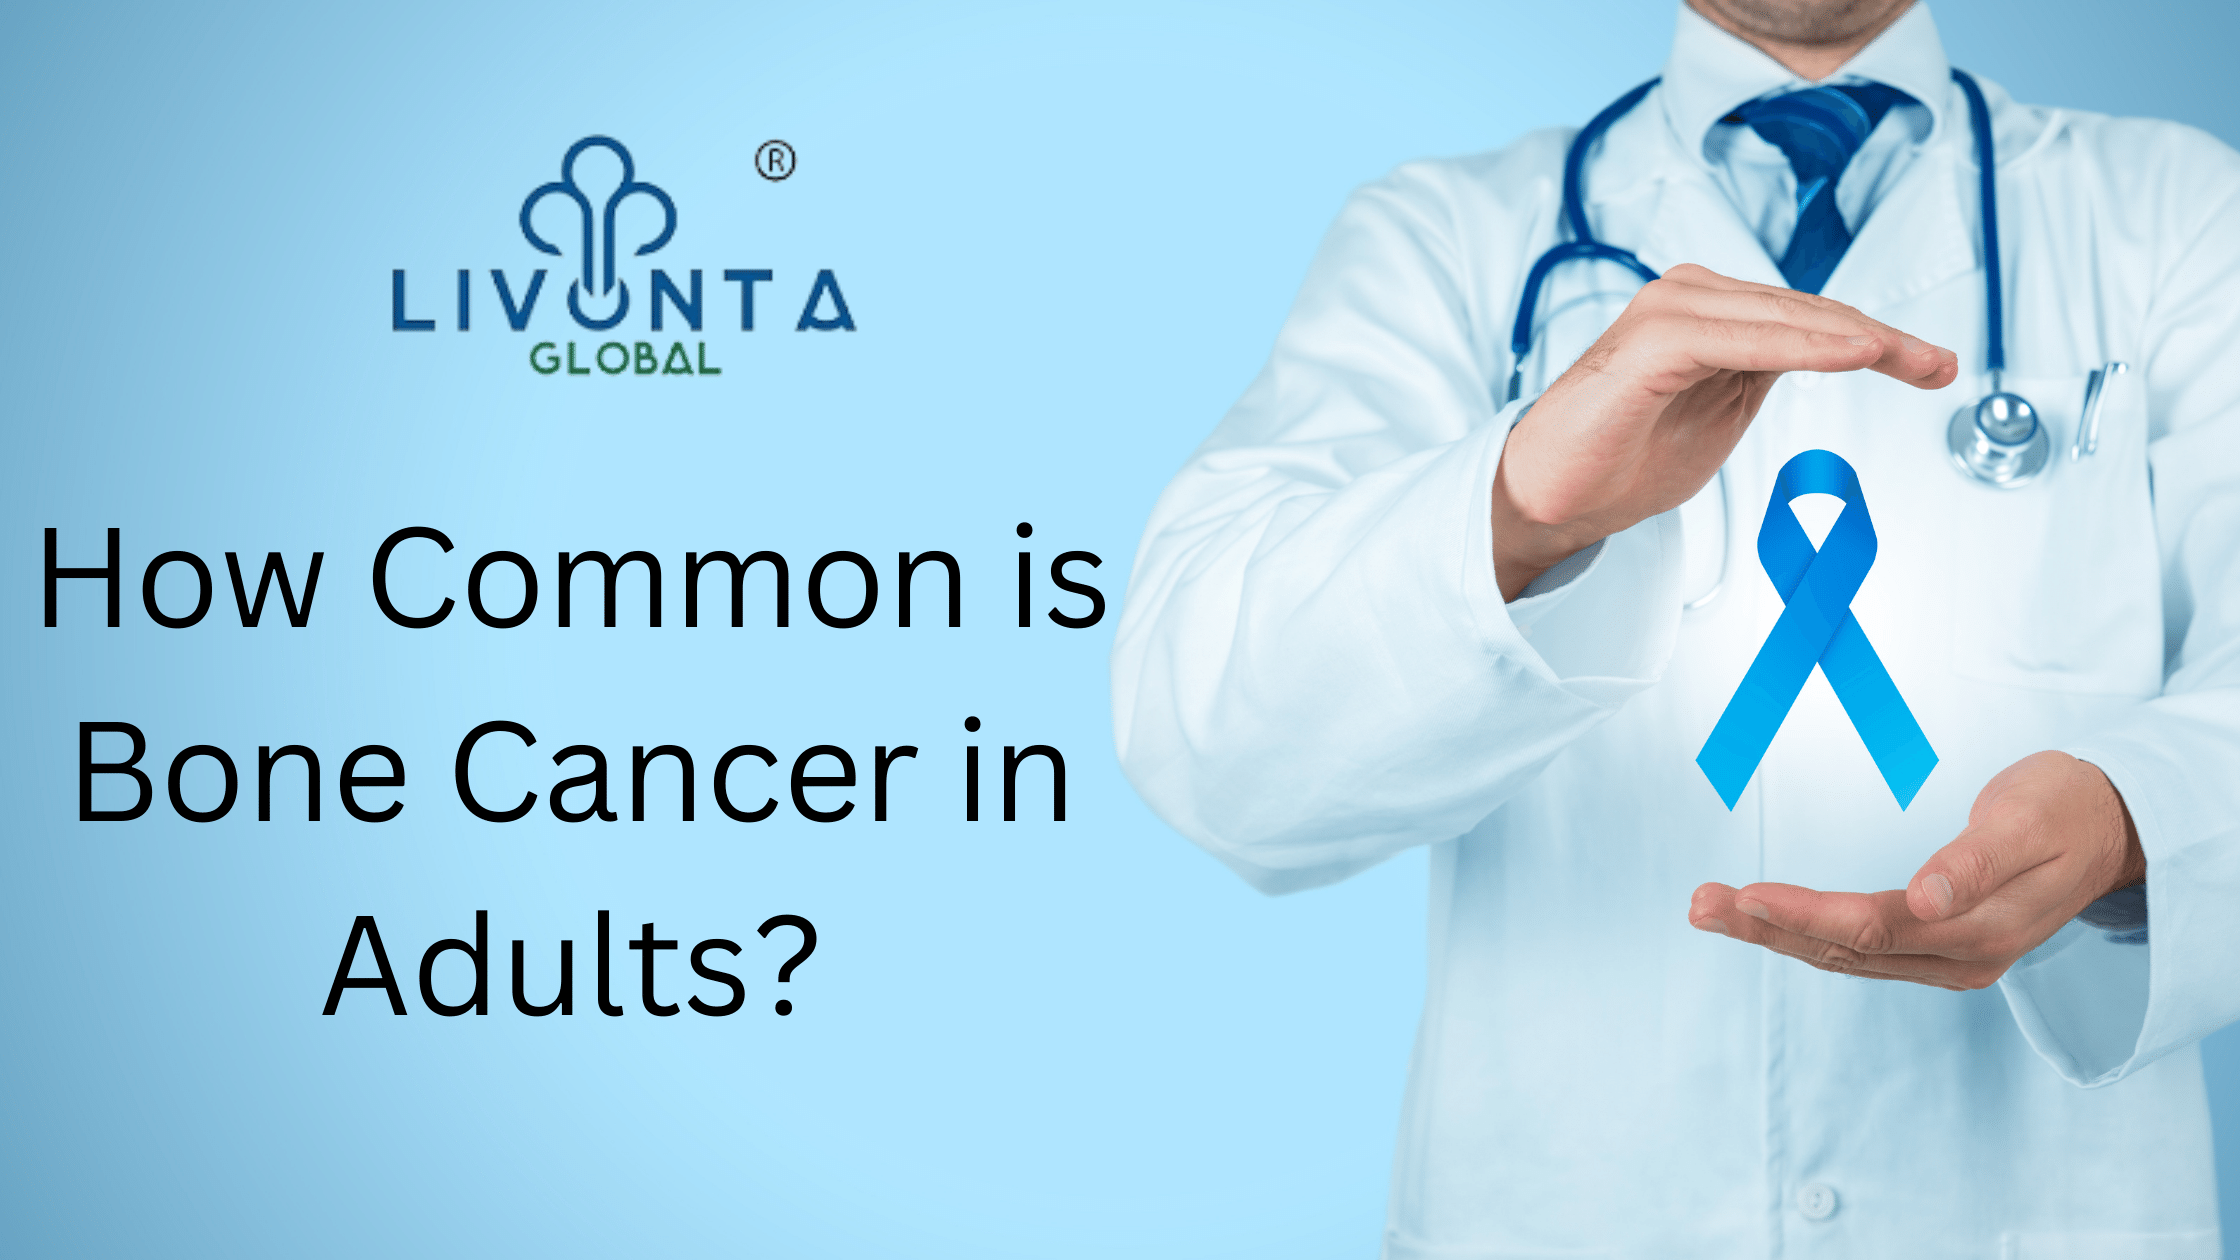 How Common is Bone Cancer in Adults?